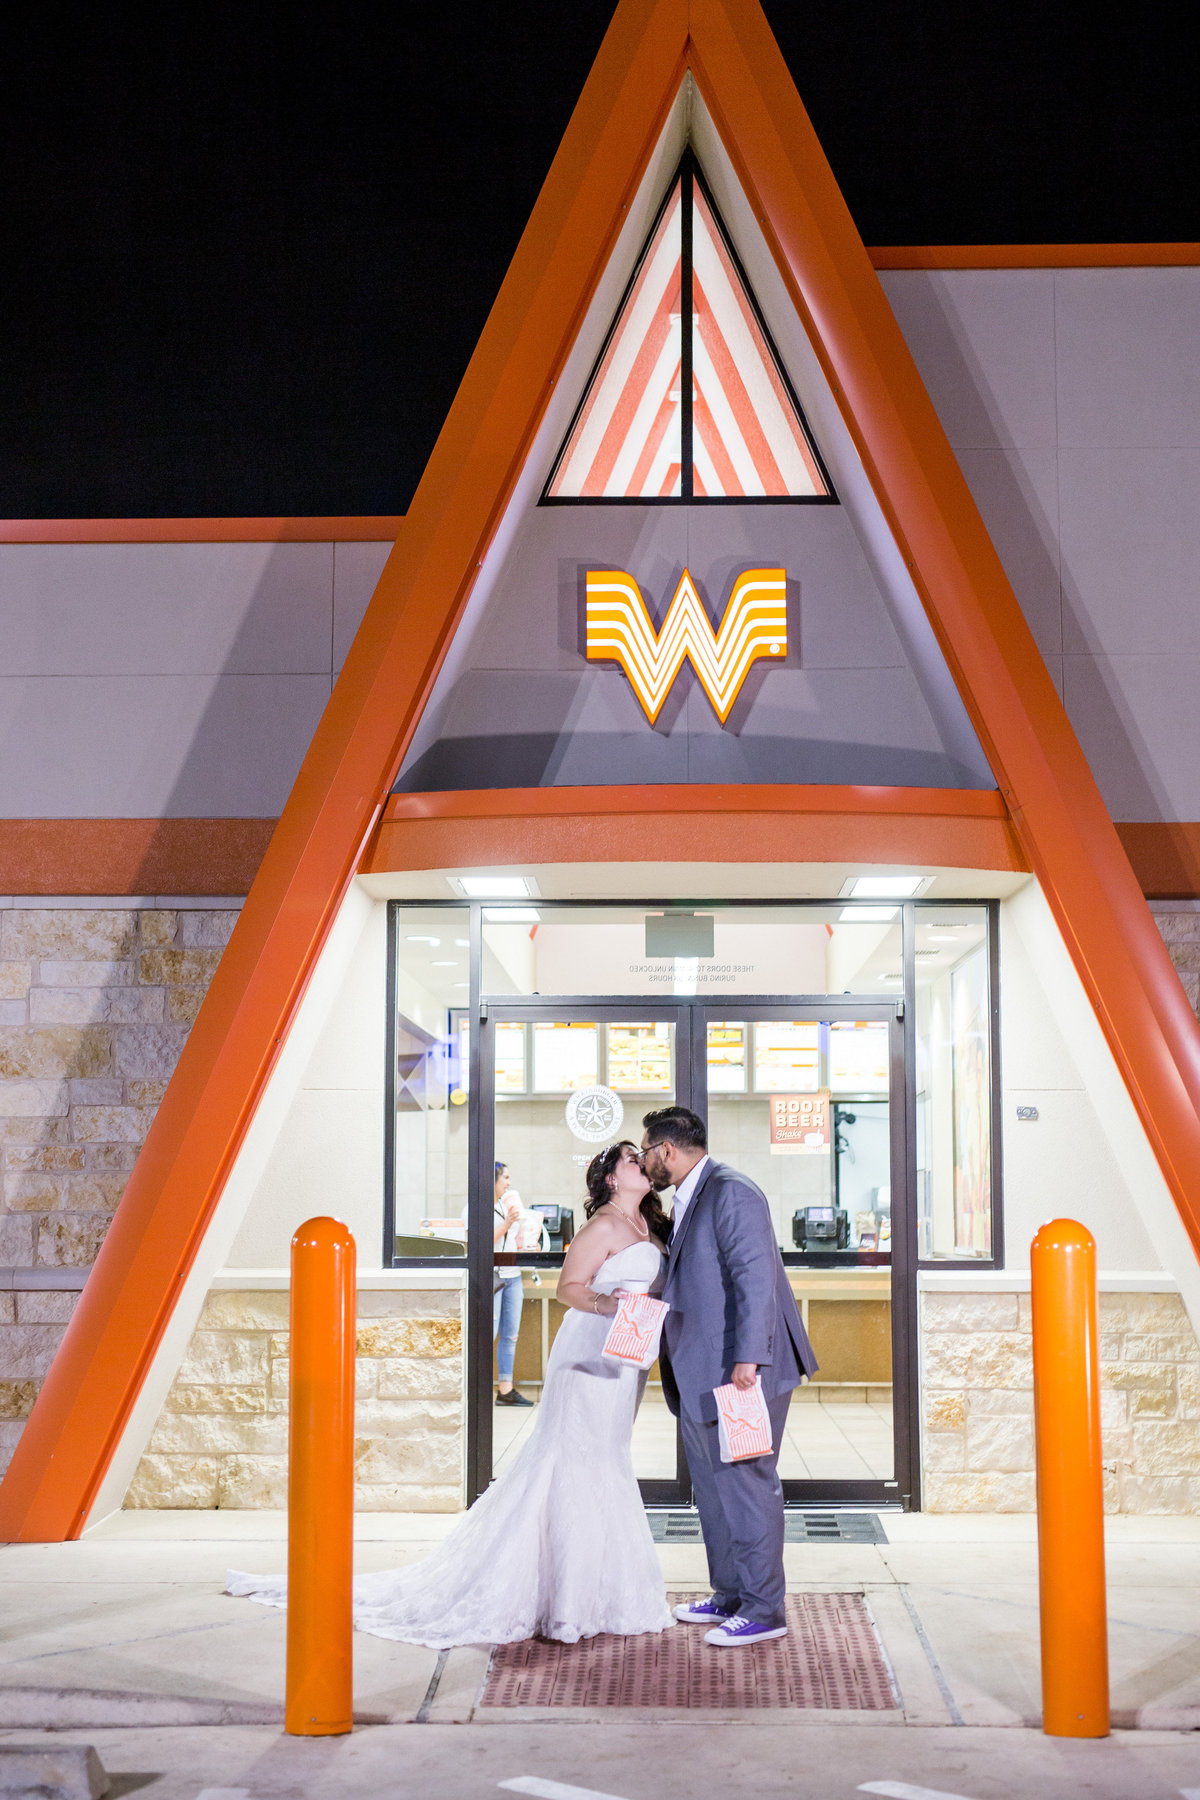 bride and groom get food at Whataburger after wedding reception